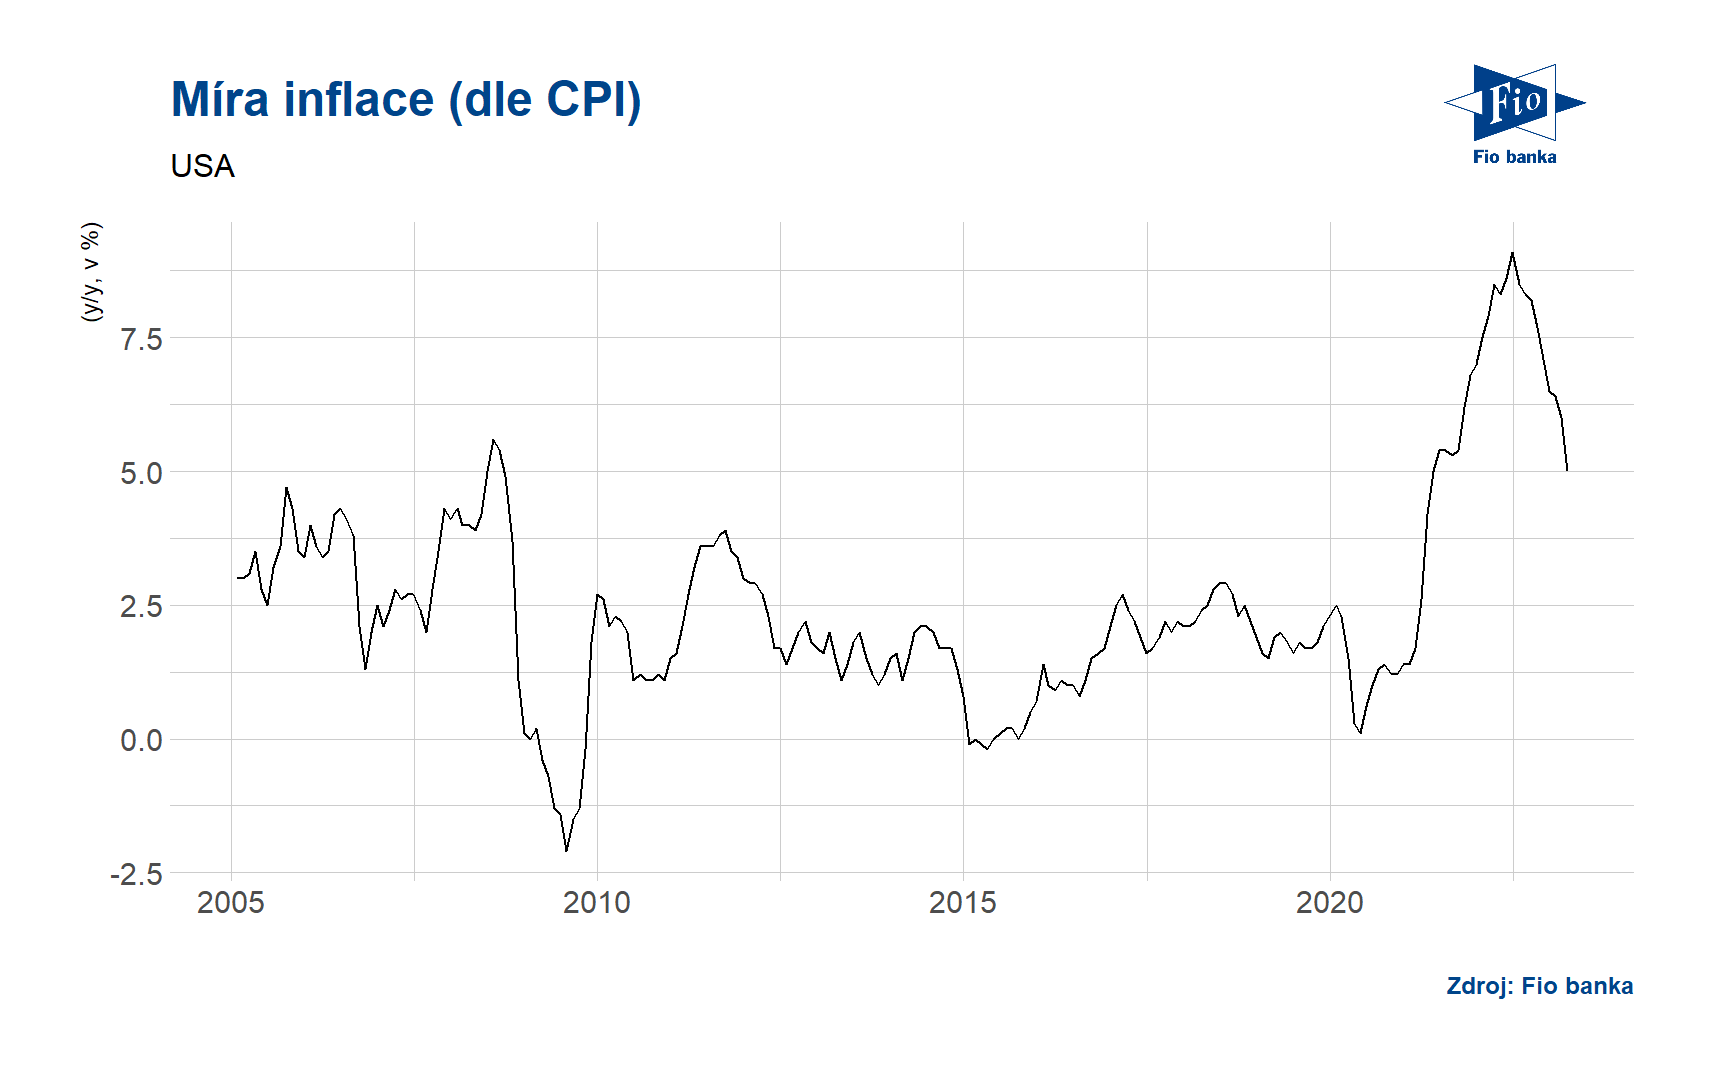 Míra inflace dle CPI - USA